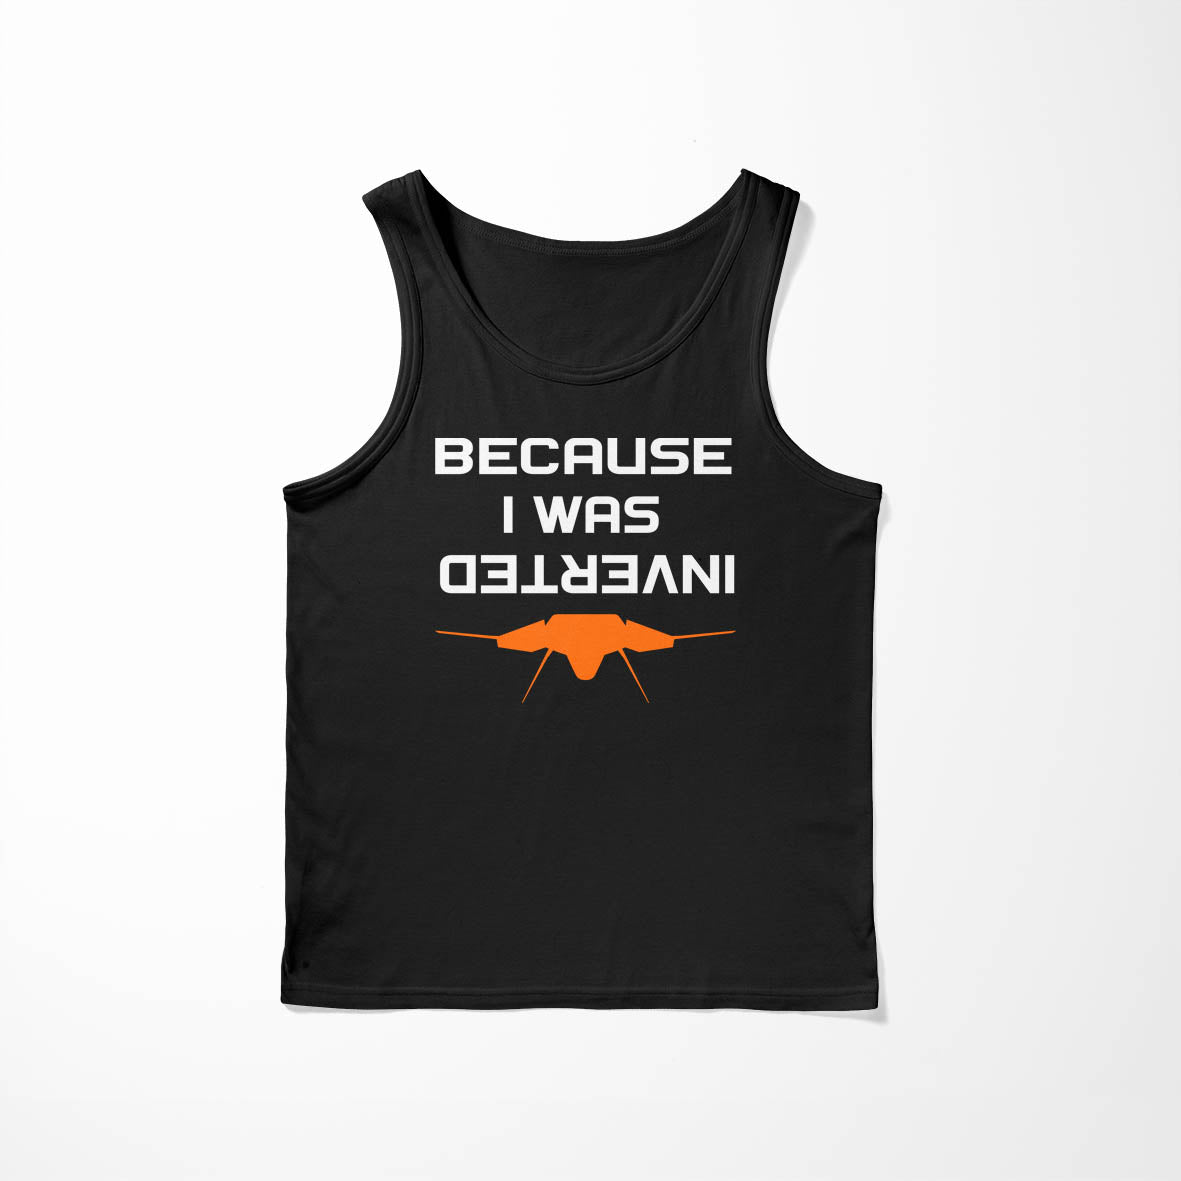 Because I was Inverted Designed Tank Tops